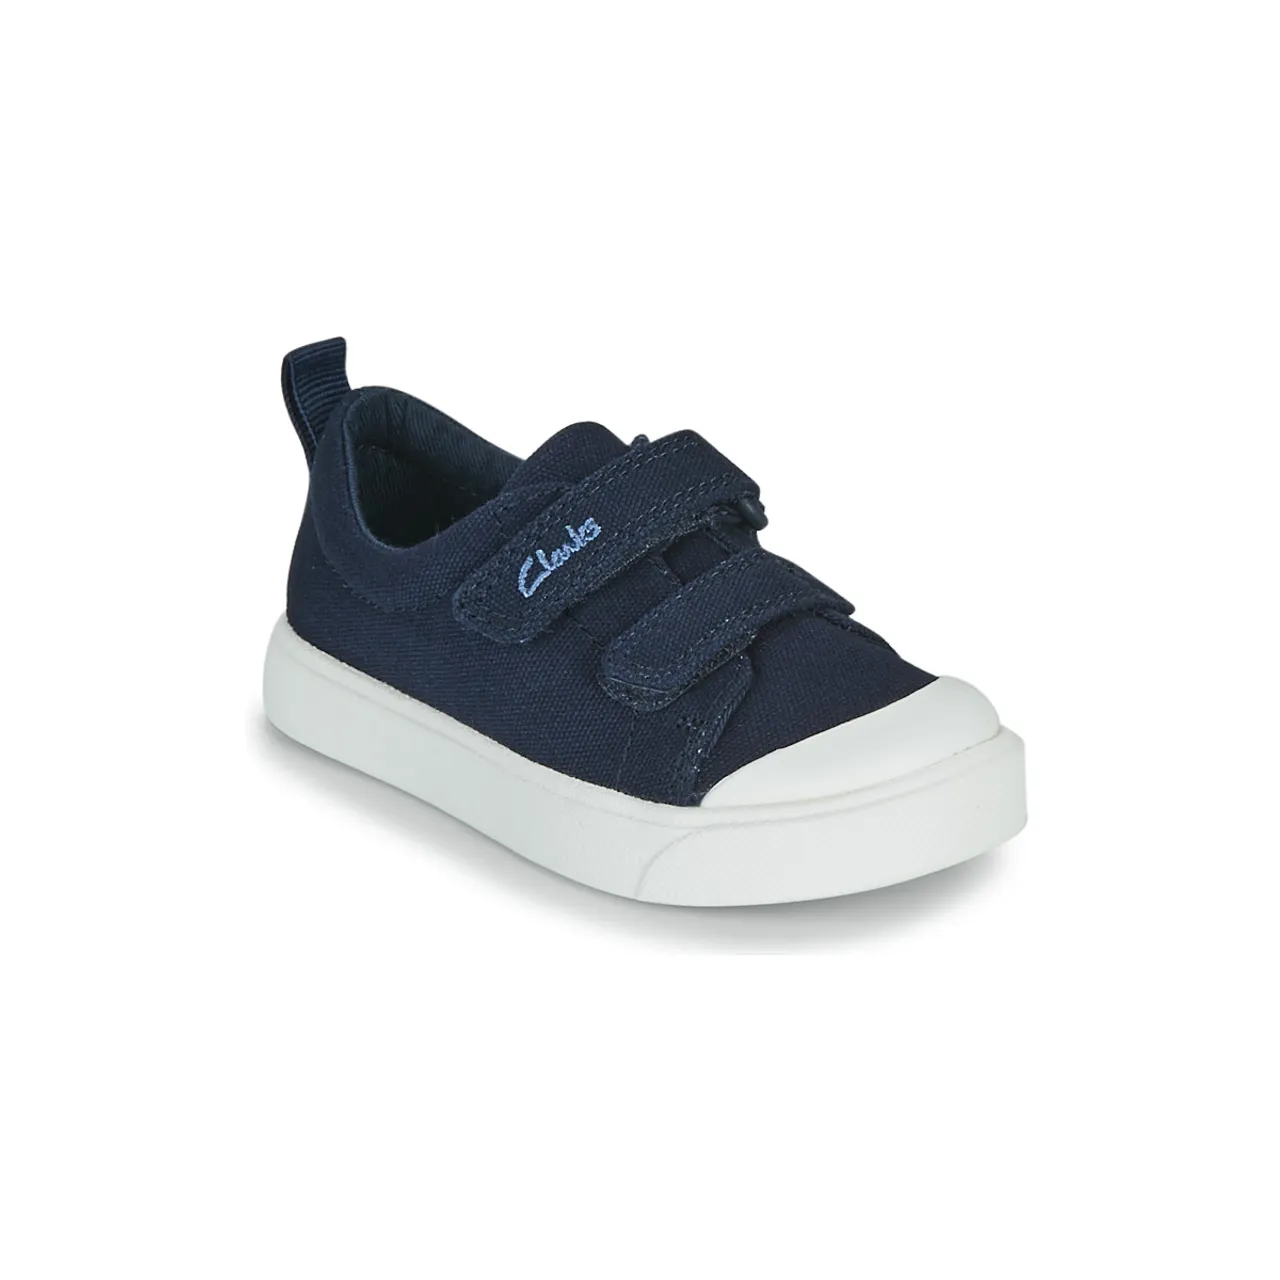 Clarks  CITY BRIGHT T  boys's Children's Shoes (Trainers) in Marine